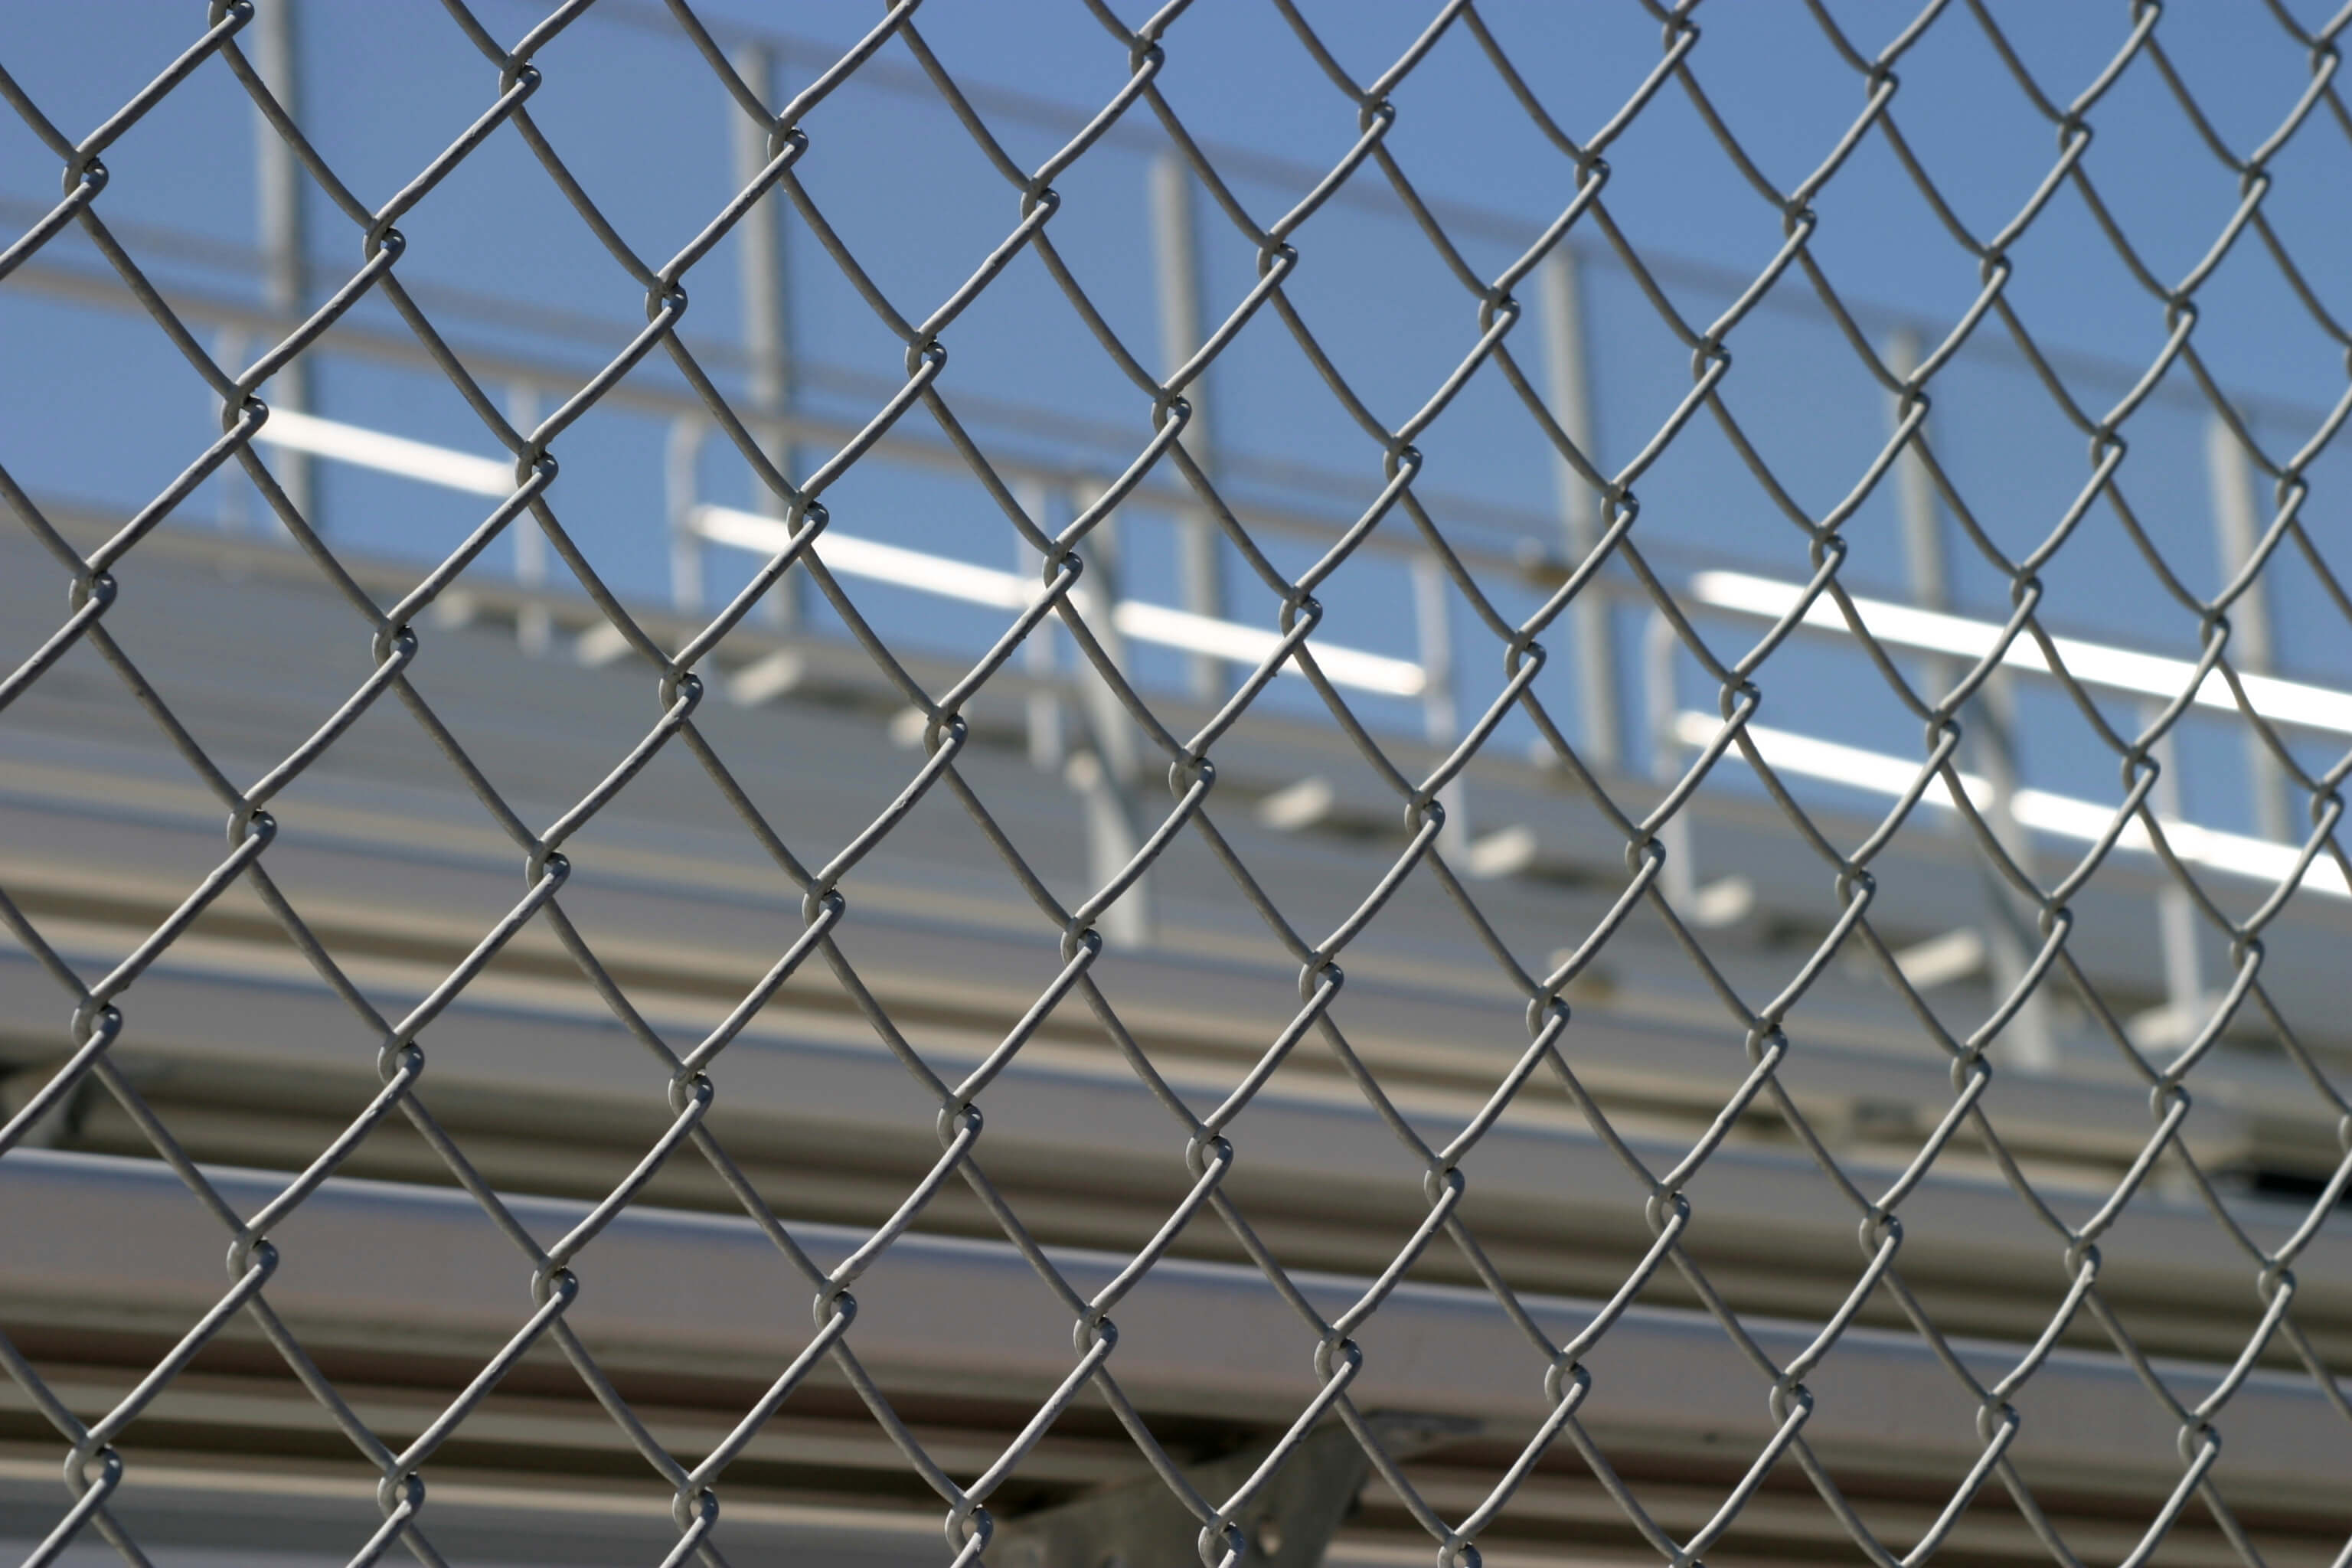 "The Functionality and Design of a Chain Link Gate"